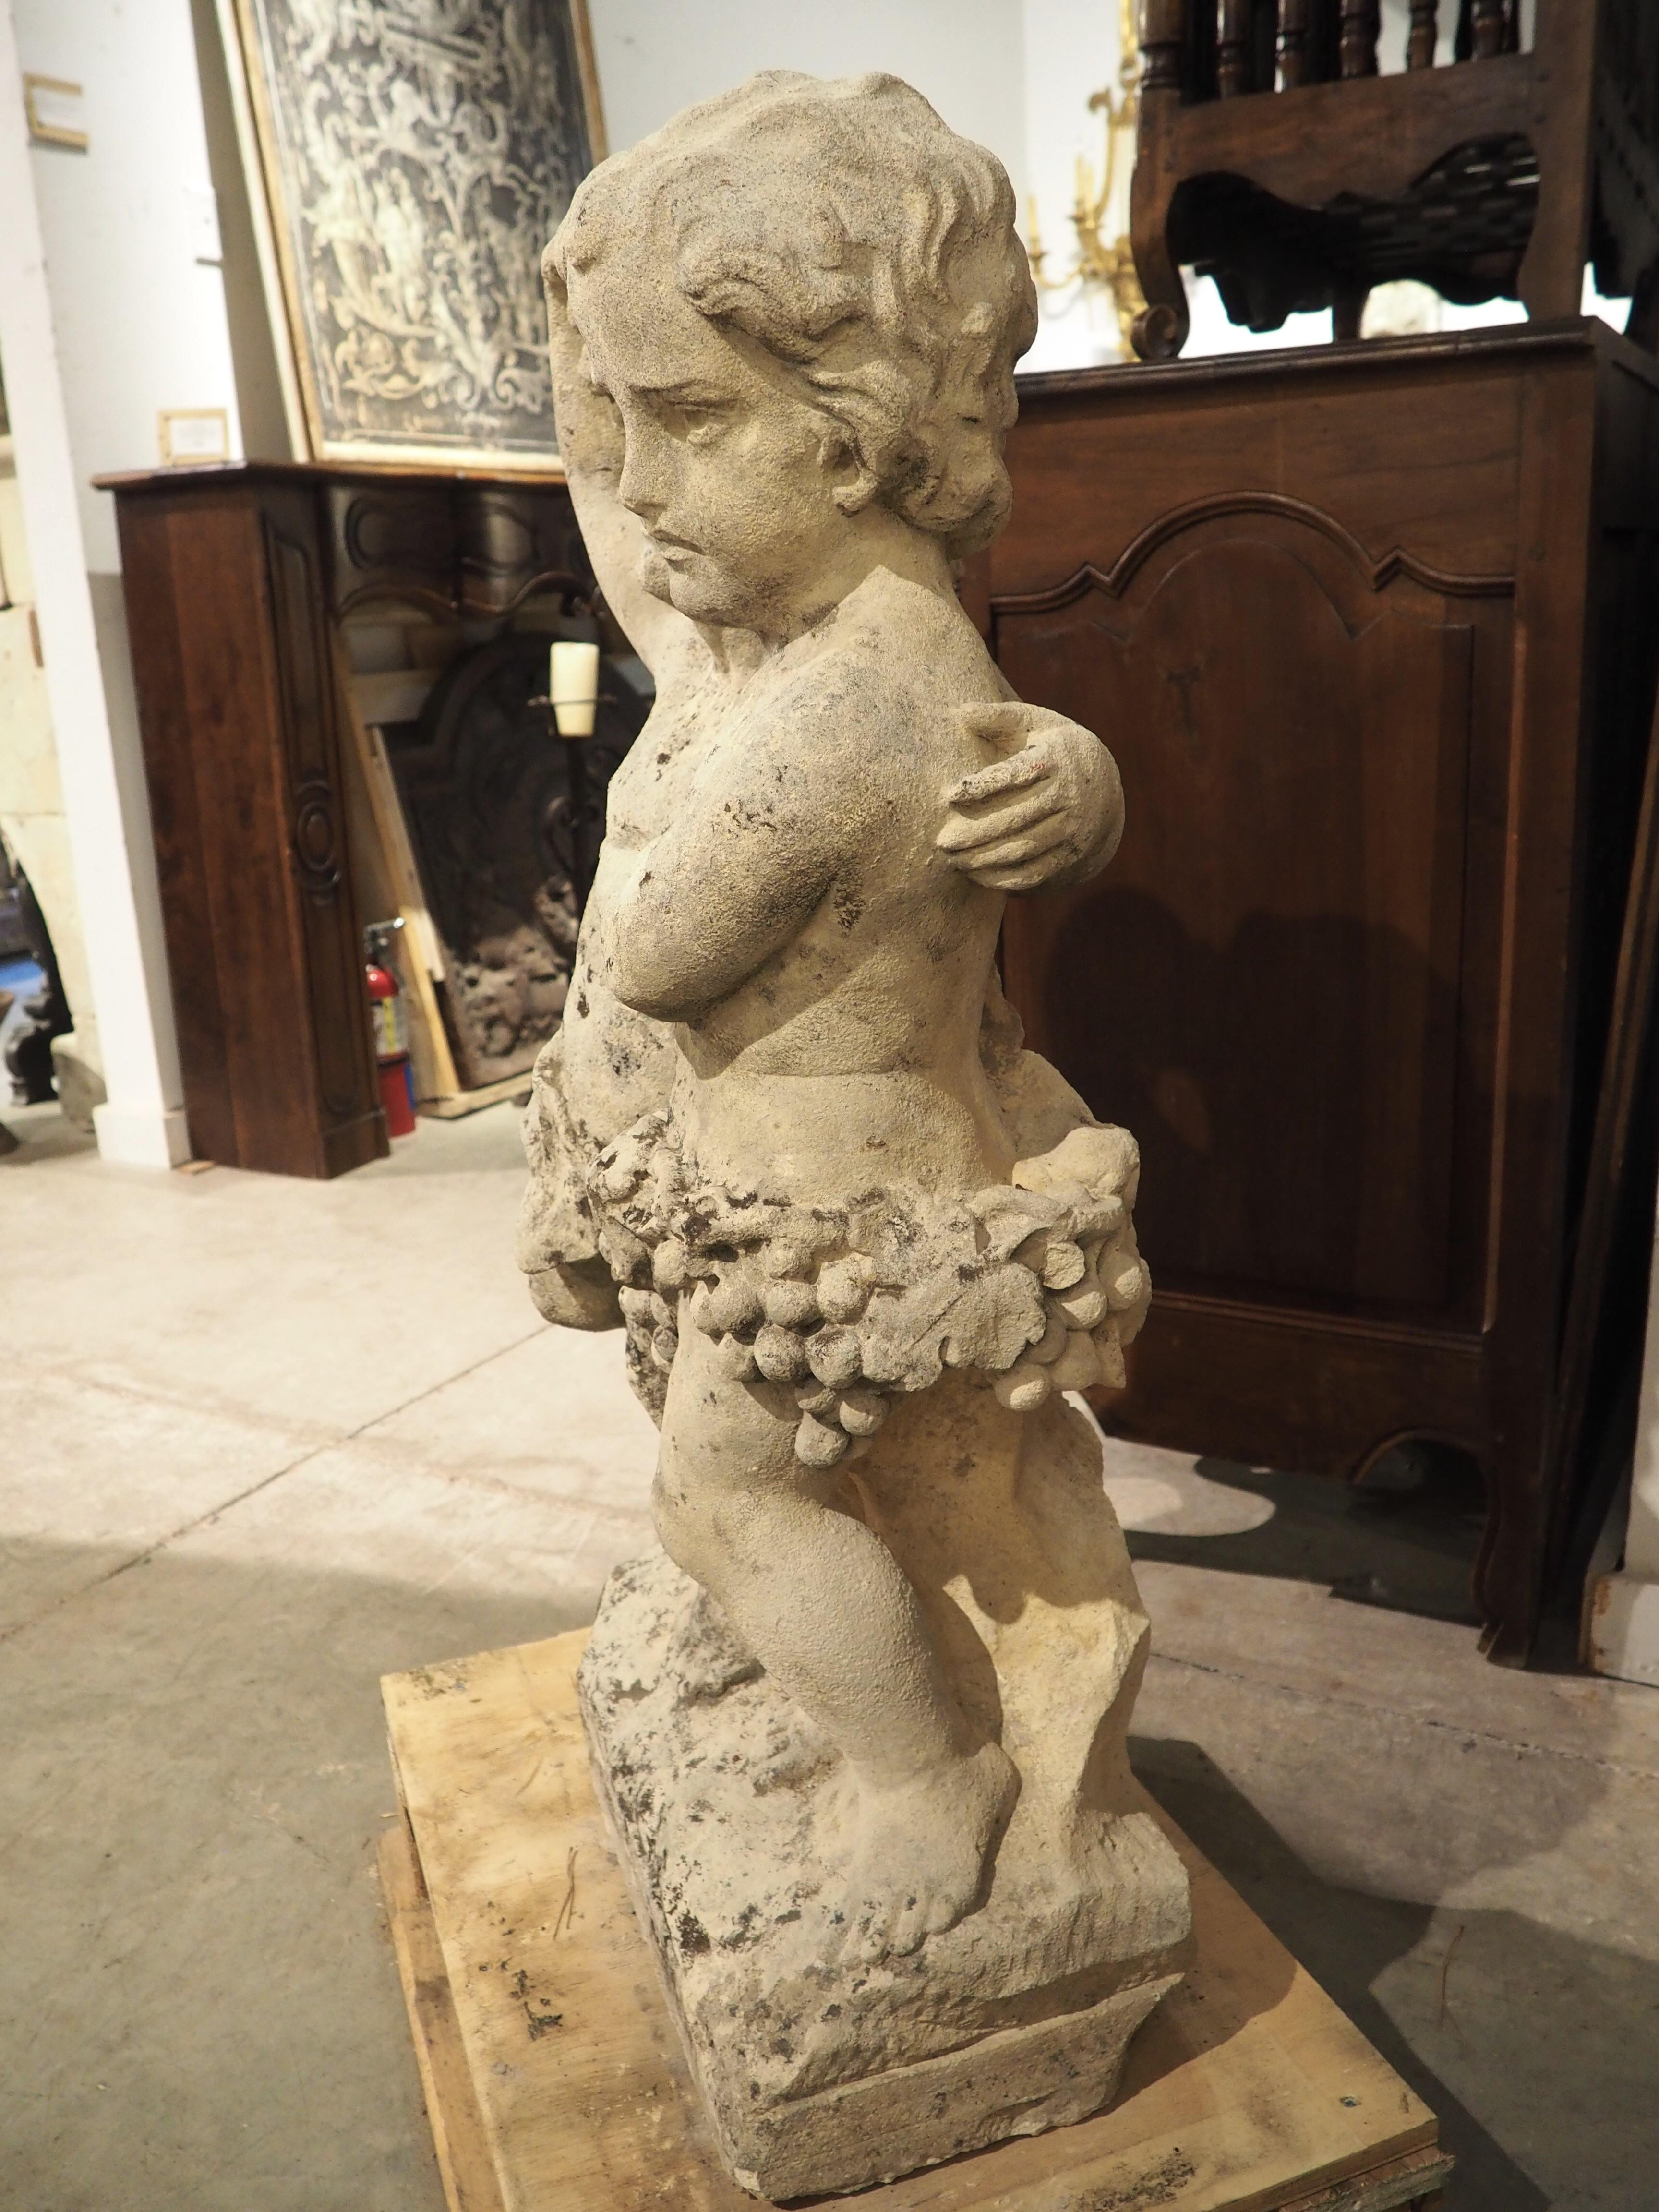 Recently discovered on a property in Nice, France, this hand-carved sculpture depicts two bacchanalian cherubs. The limestone carving, measuring over 37 inches tall and dating to the 1700s, shows a playful duo huddling together, arms wrapped around